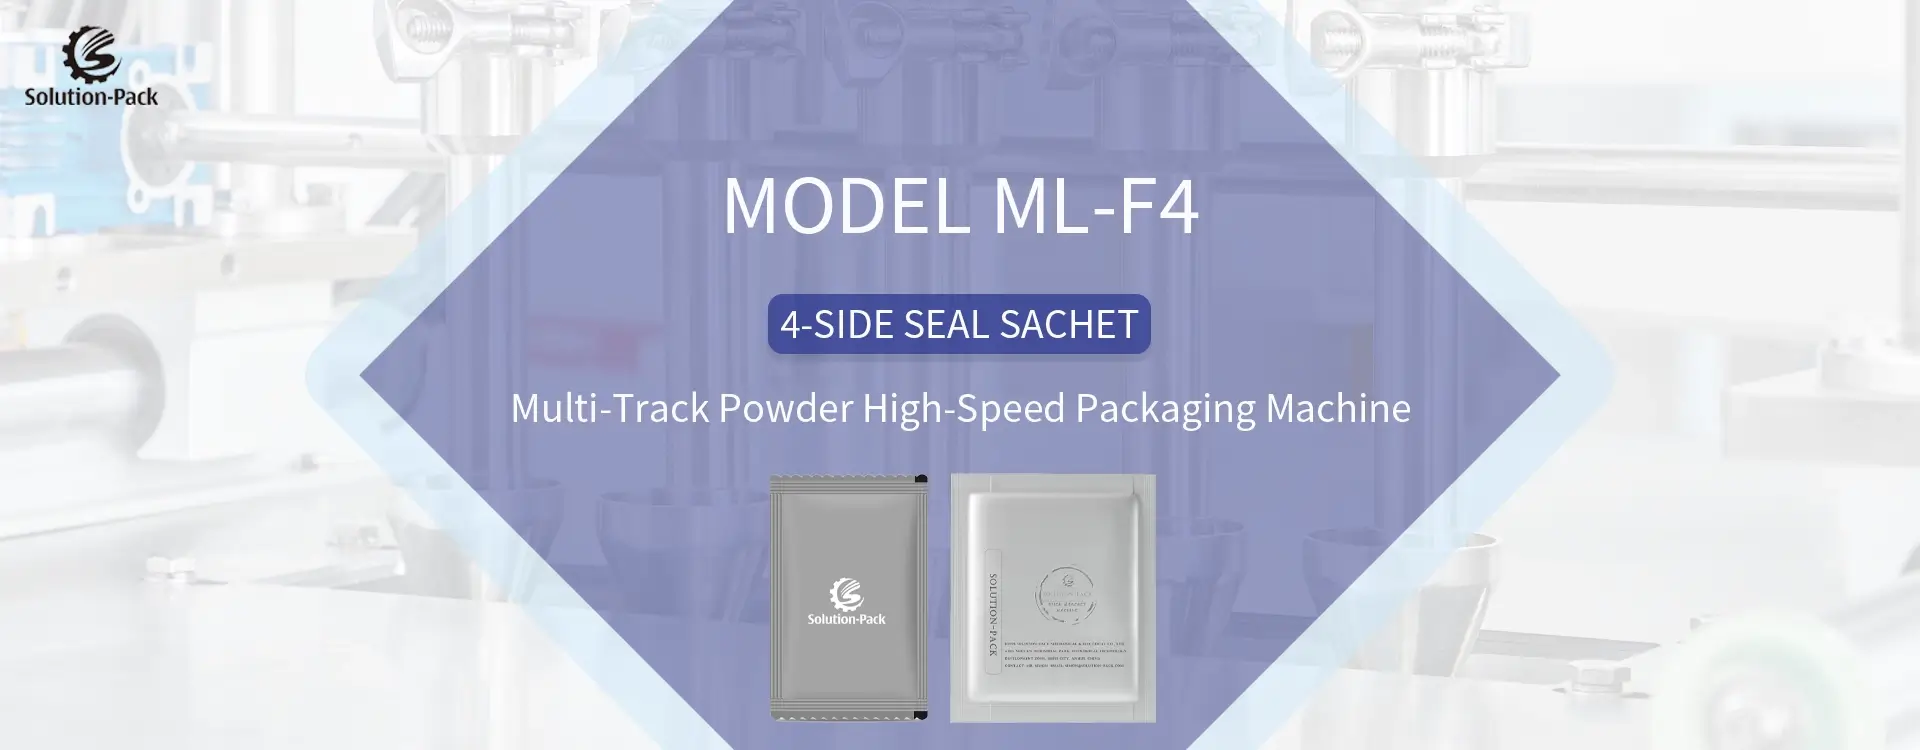 Model ML-F4 Automatic High-Speed Multi-Track Powder 4-Side Seal Sachet Packaging Machine Unit Heading Banner Picture | Solution-Pack